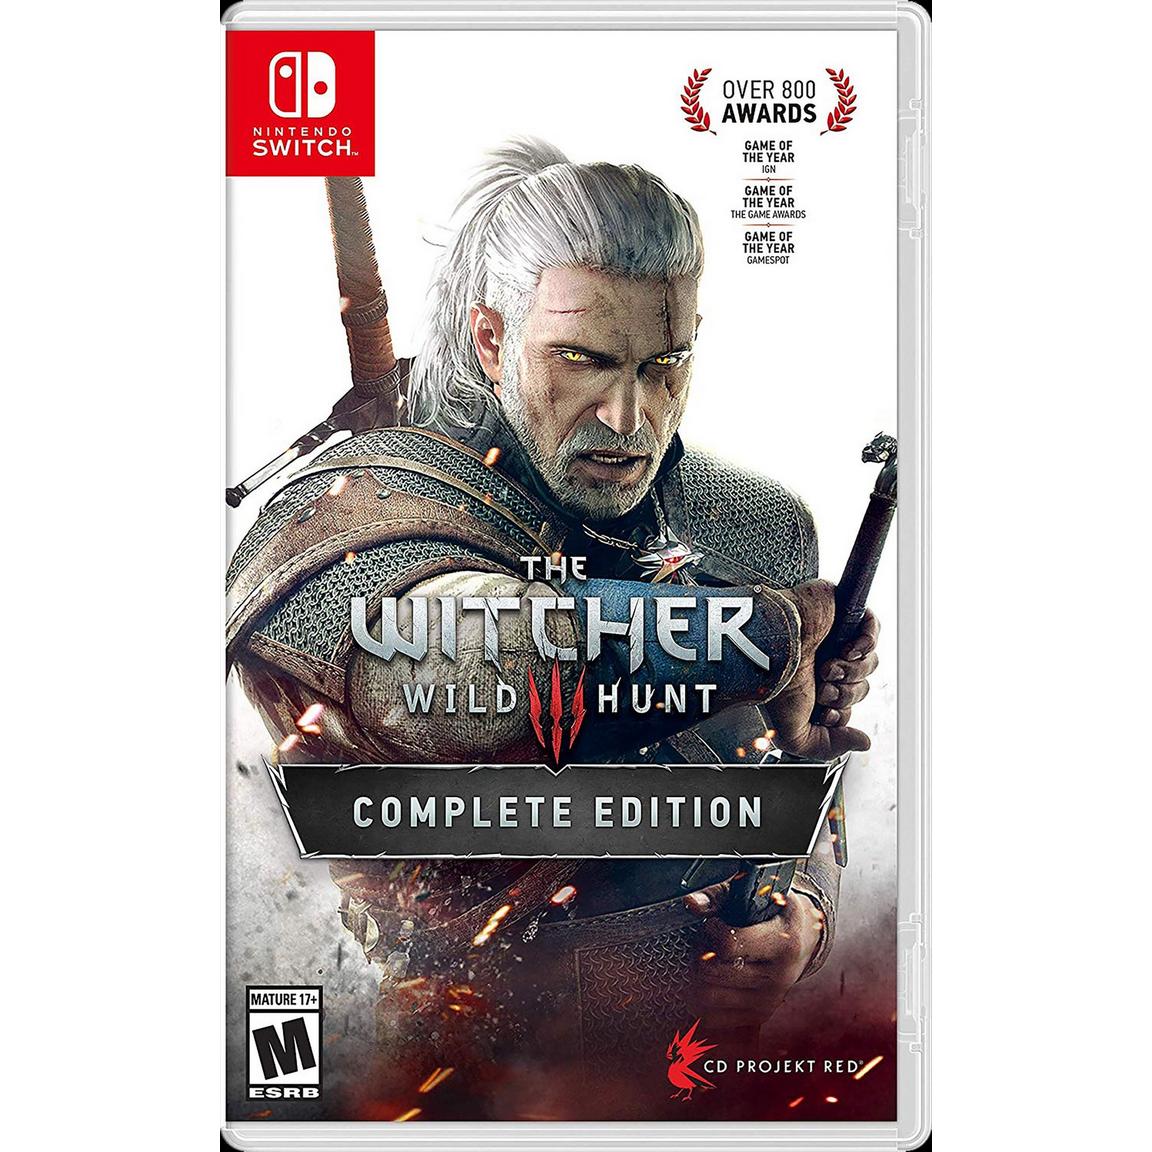 The Witcher III: Wild Hunt Complete Edition - Nintendo Switch -  CD Projekt RED, 111947